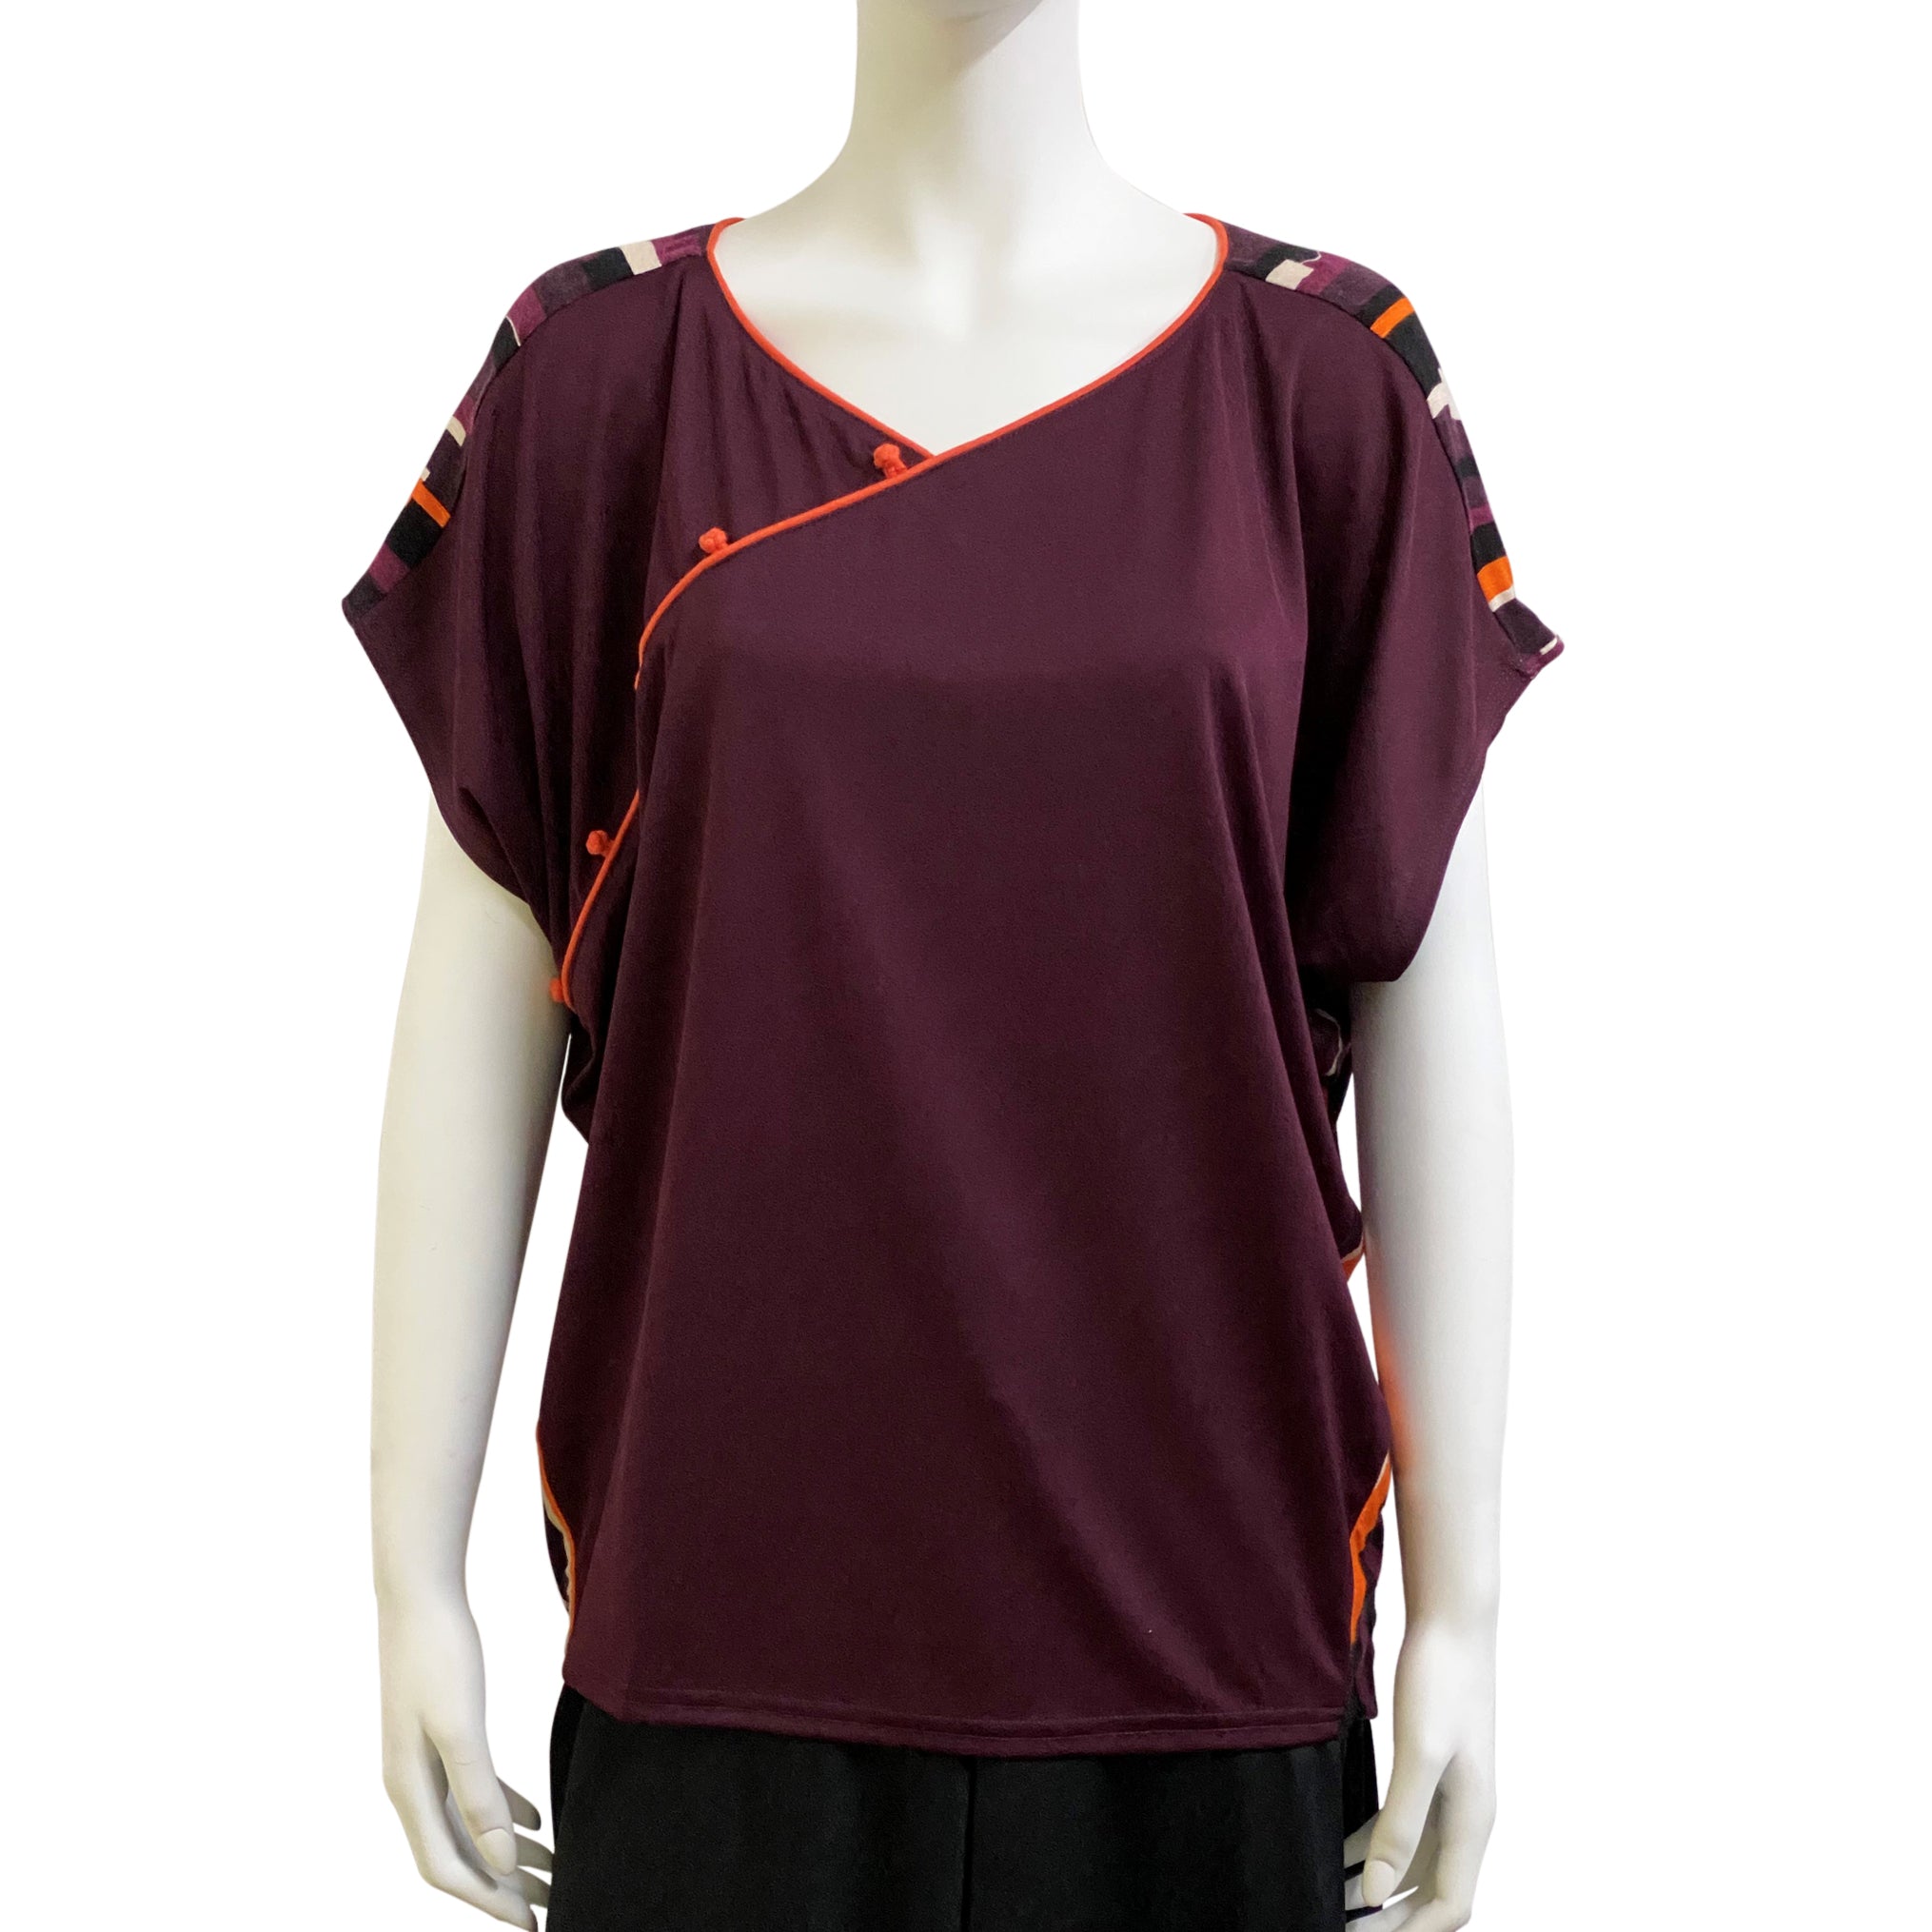 Wing Top with Contrast Buttons, Burgundy / Orange Block